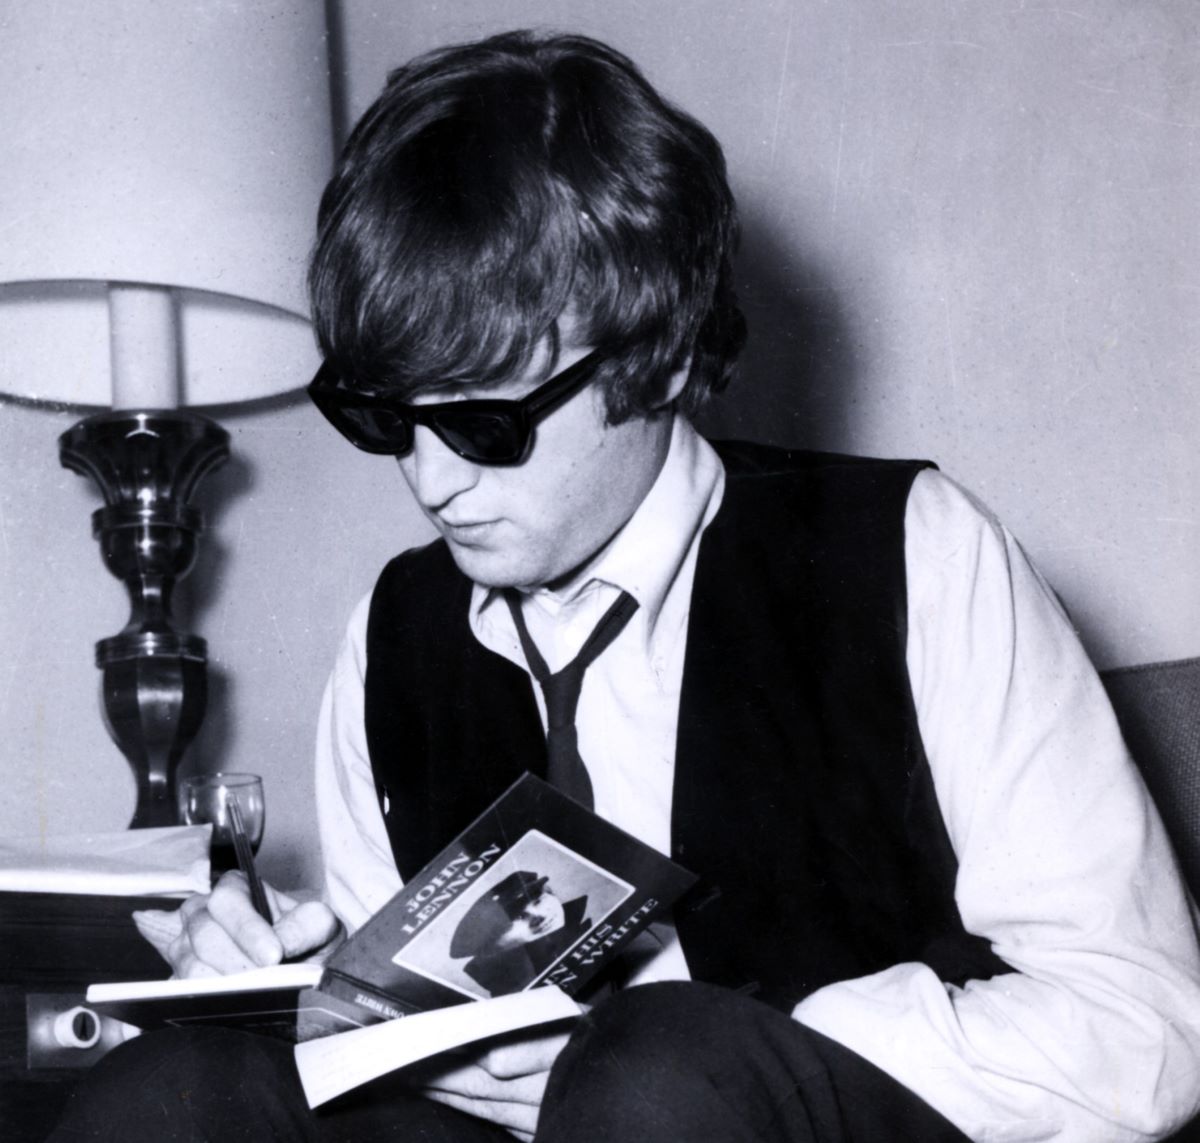 John Lennon wears sunglasses and a tie and signs copies of his book "In His Own Write."